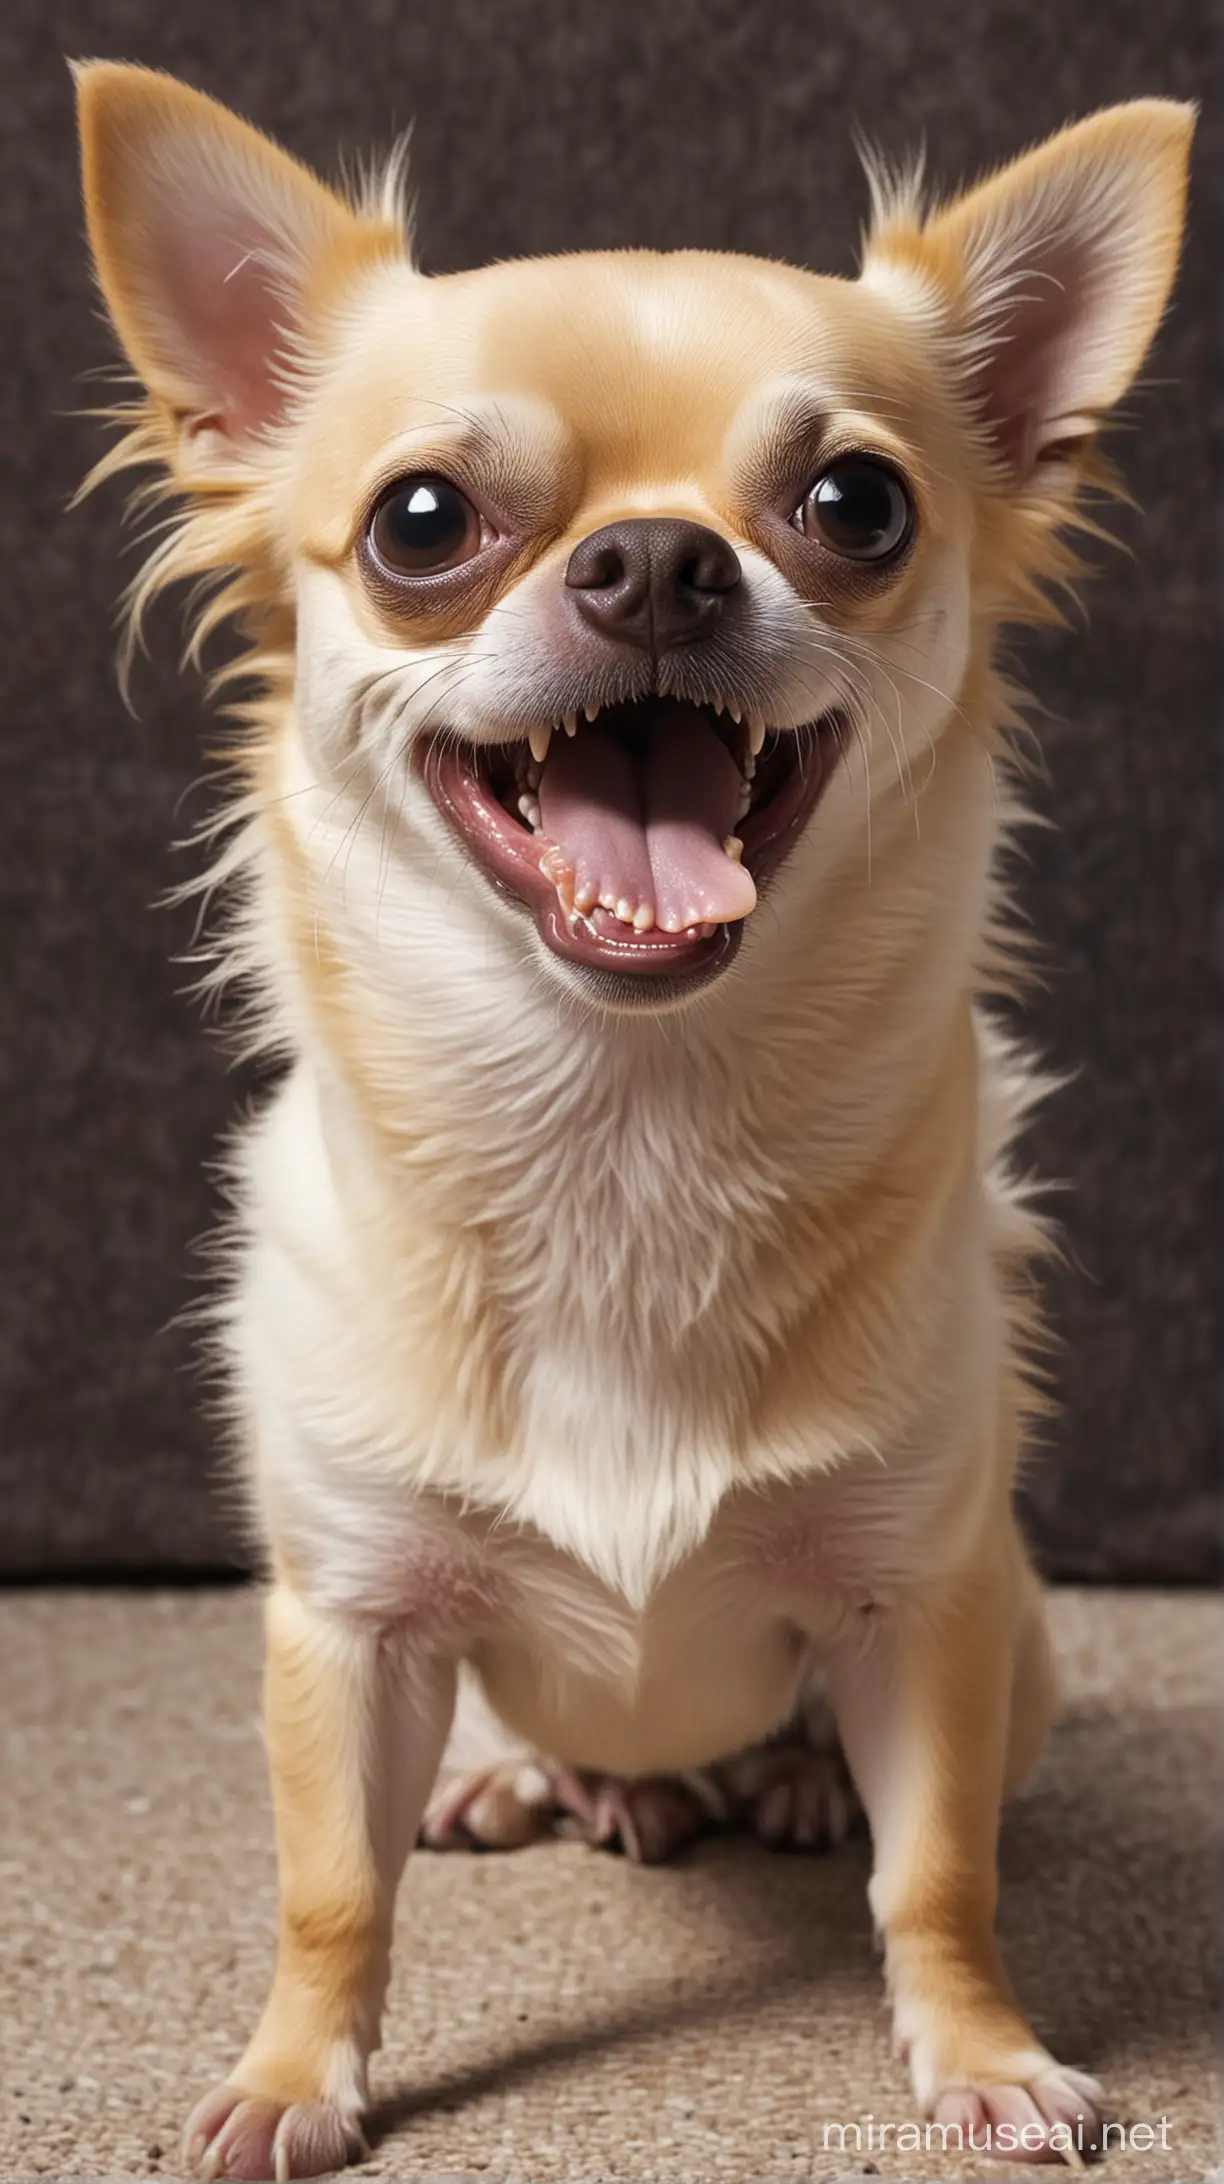 Generate fancy image of chihuahua having millions of teeths exactly like venom